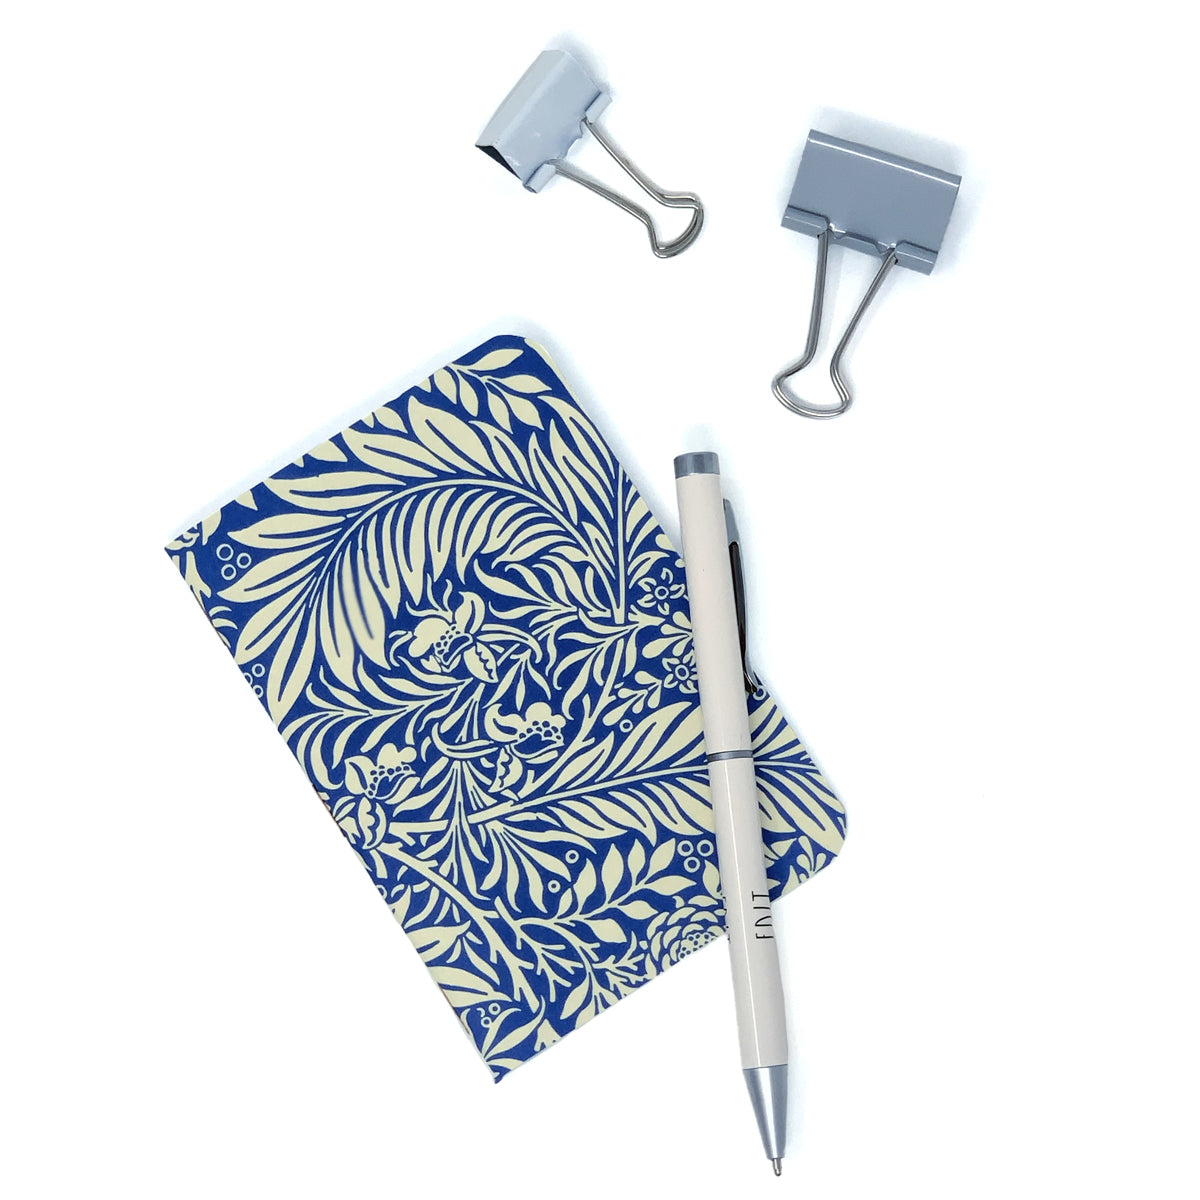 Pocket notebook with William Morris blue and off white floral pattern on cover. 2 binder clips and white pen sit next to the notebook on a white background.